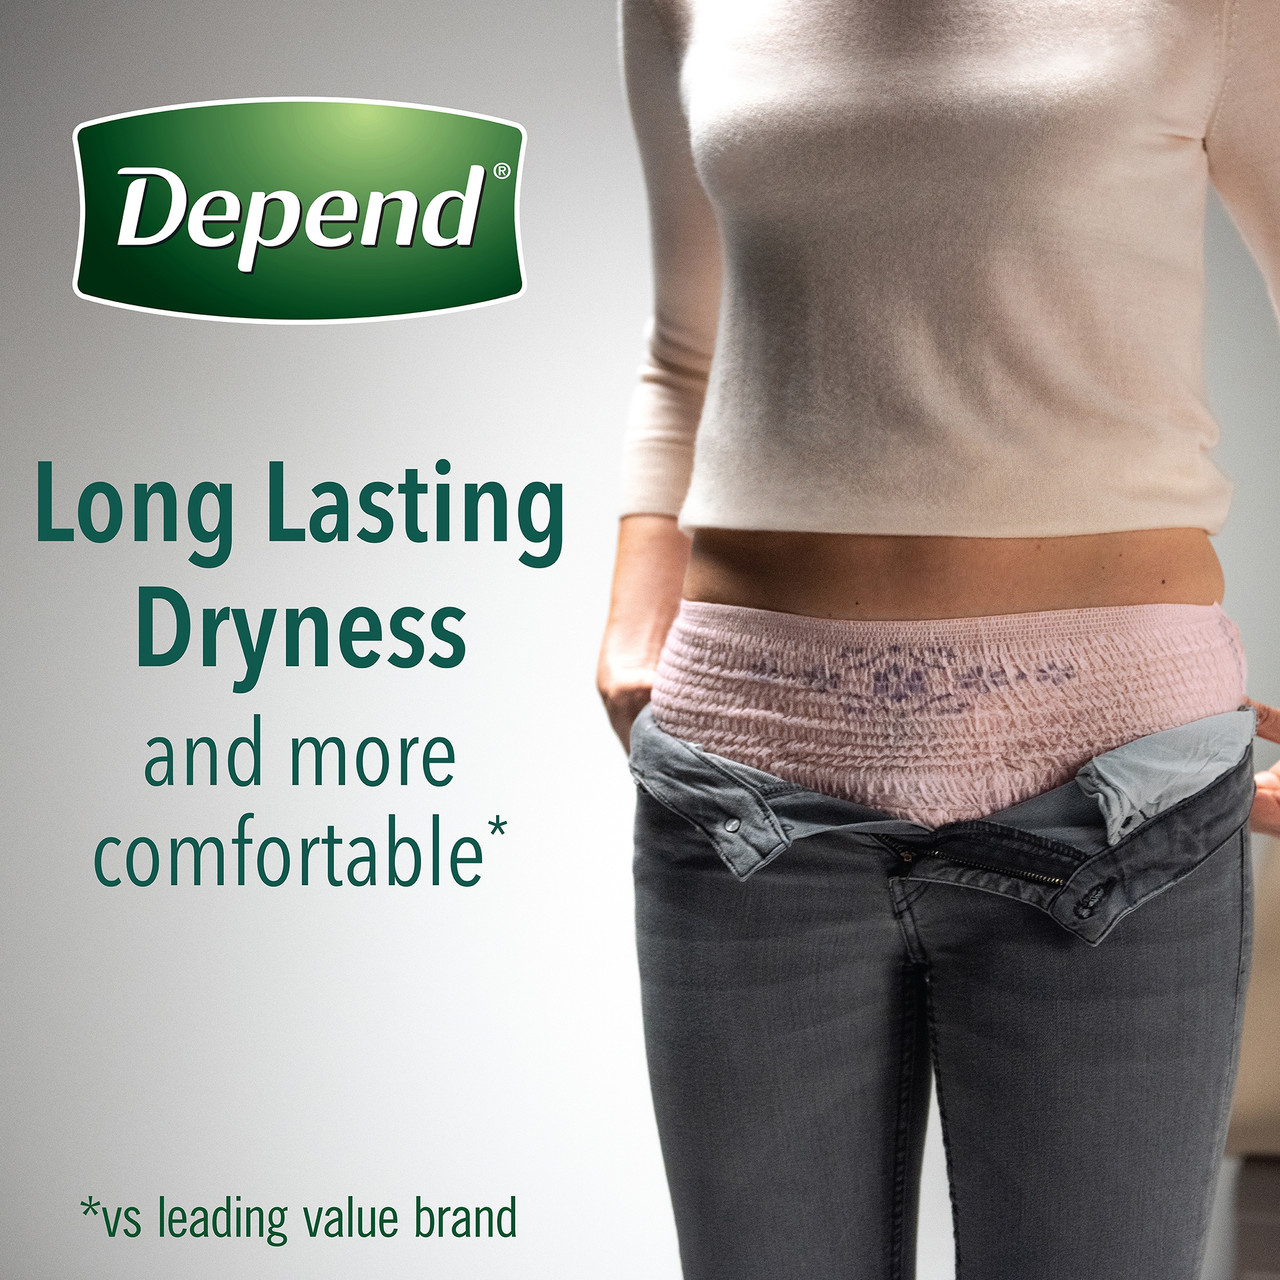 Depend Fresh Protection Incontinence Underwear for Women, Maximum  Absorbency - Simply Medical